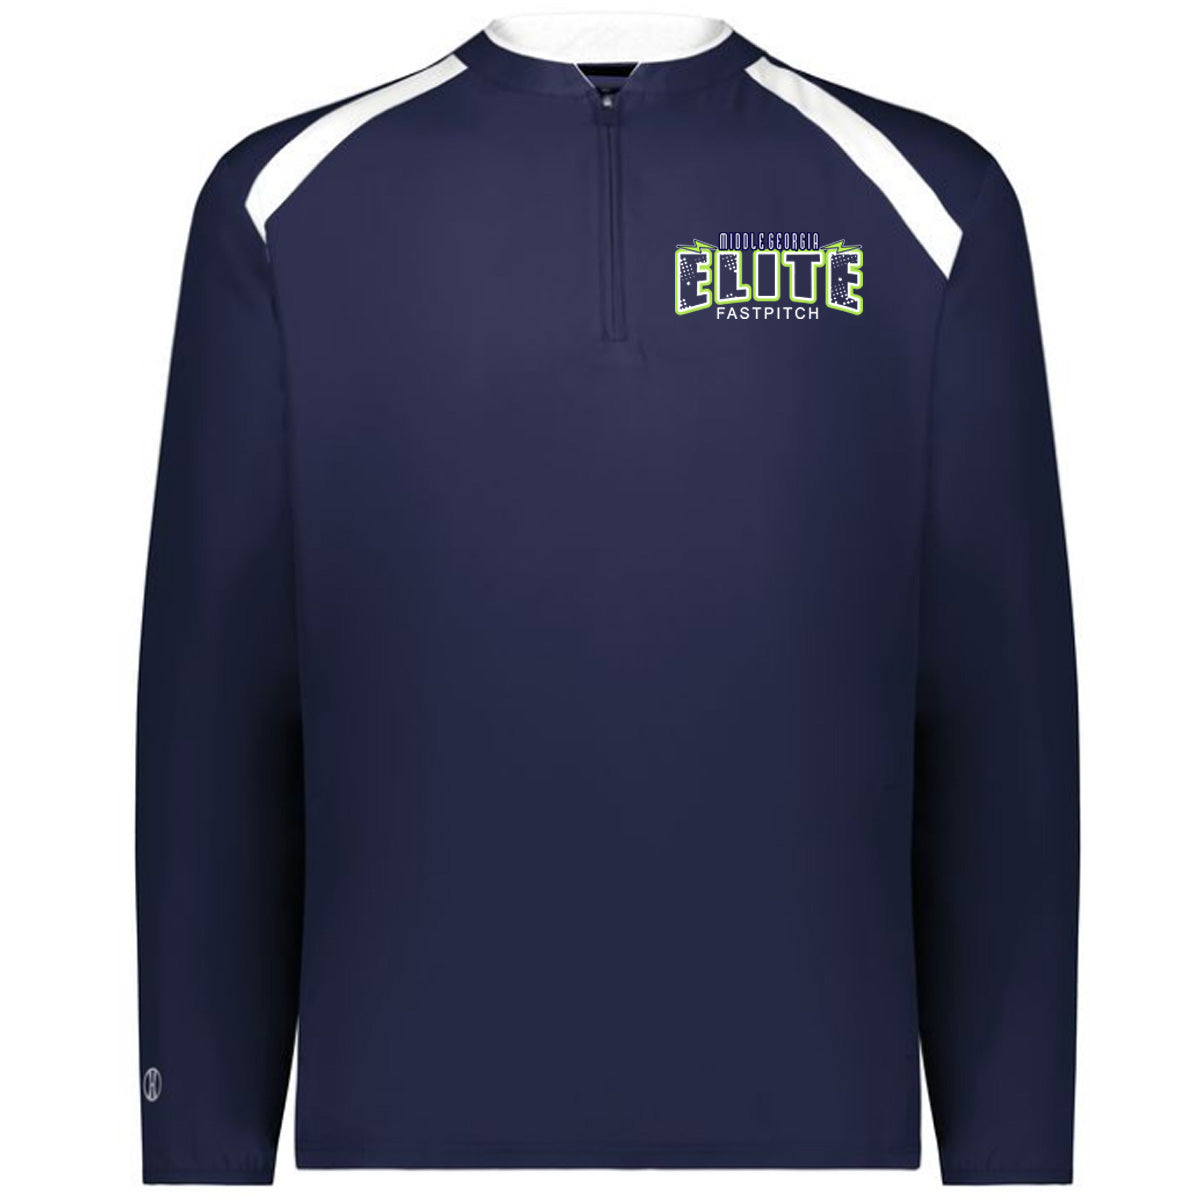 Elite - Clubhouse Longsleeves Cage Jacket with Lightening Bolt - Navy - Southern Grace Creations